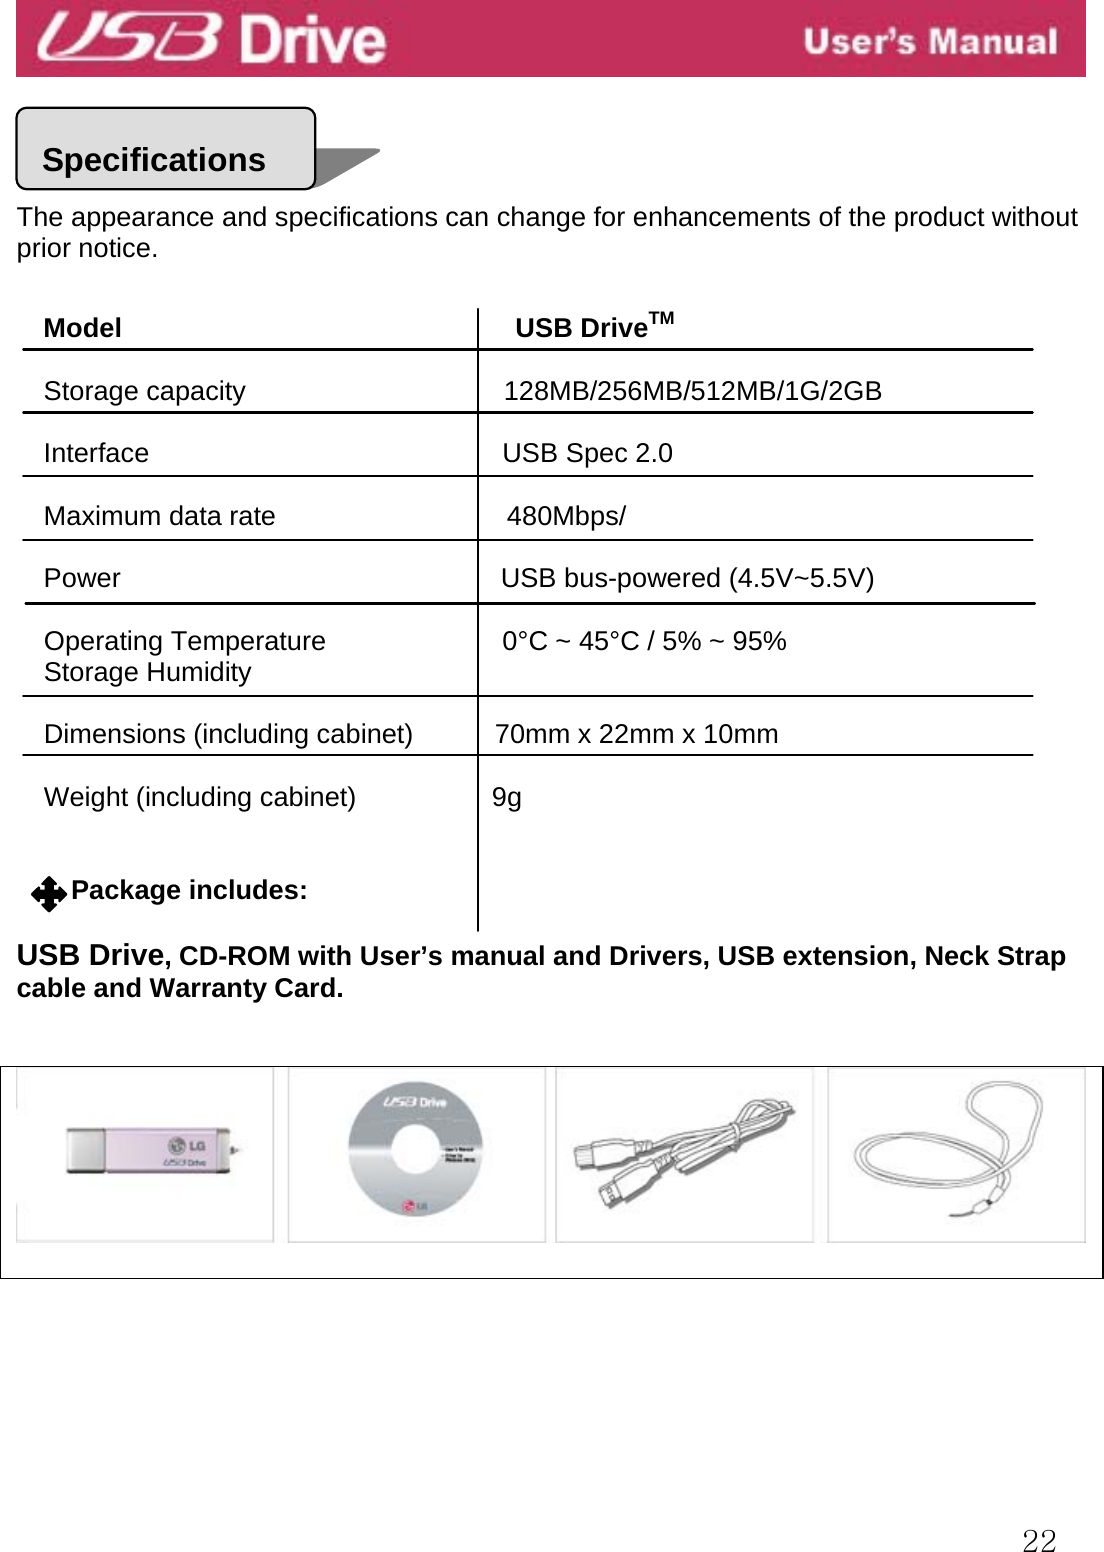  22     The appearance and specifications can change for enhancements of the product without prior notice.   Model                             USB DriveTM  Storage capacity                      128MB/256MB/512MB/1G/2GB Interface                          USB Spec 2.0  Maximum data rate                 480Mbps/  Power                            USB bus-powered (4.5V~5.5V)  Operating Temperature             0°C ~ 45°C / 5% ~ 95% Storage Humidity  Dimensions (including cabinet)            70mm x 22mm x 10mm     Weight (including cabinet)          9g   Package includes:  USB Drive, CD-ROM with User’s manual and Drivers, USB extension, Neck Strap cable and Warranty Card.    Specifications 